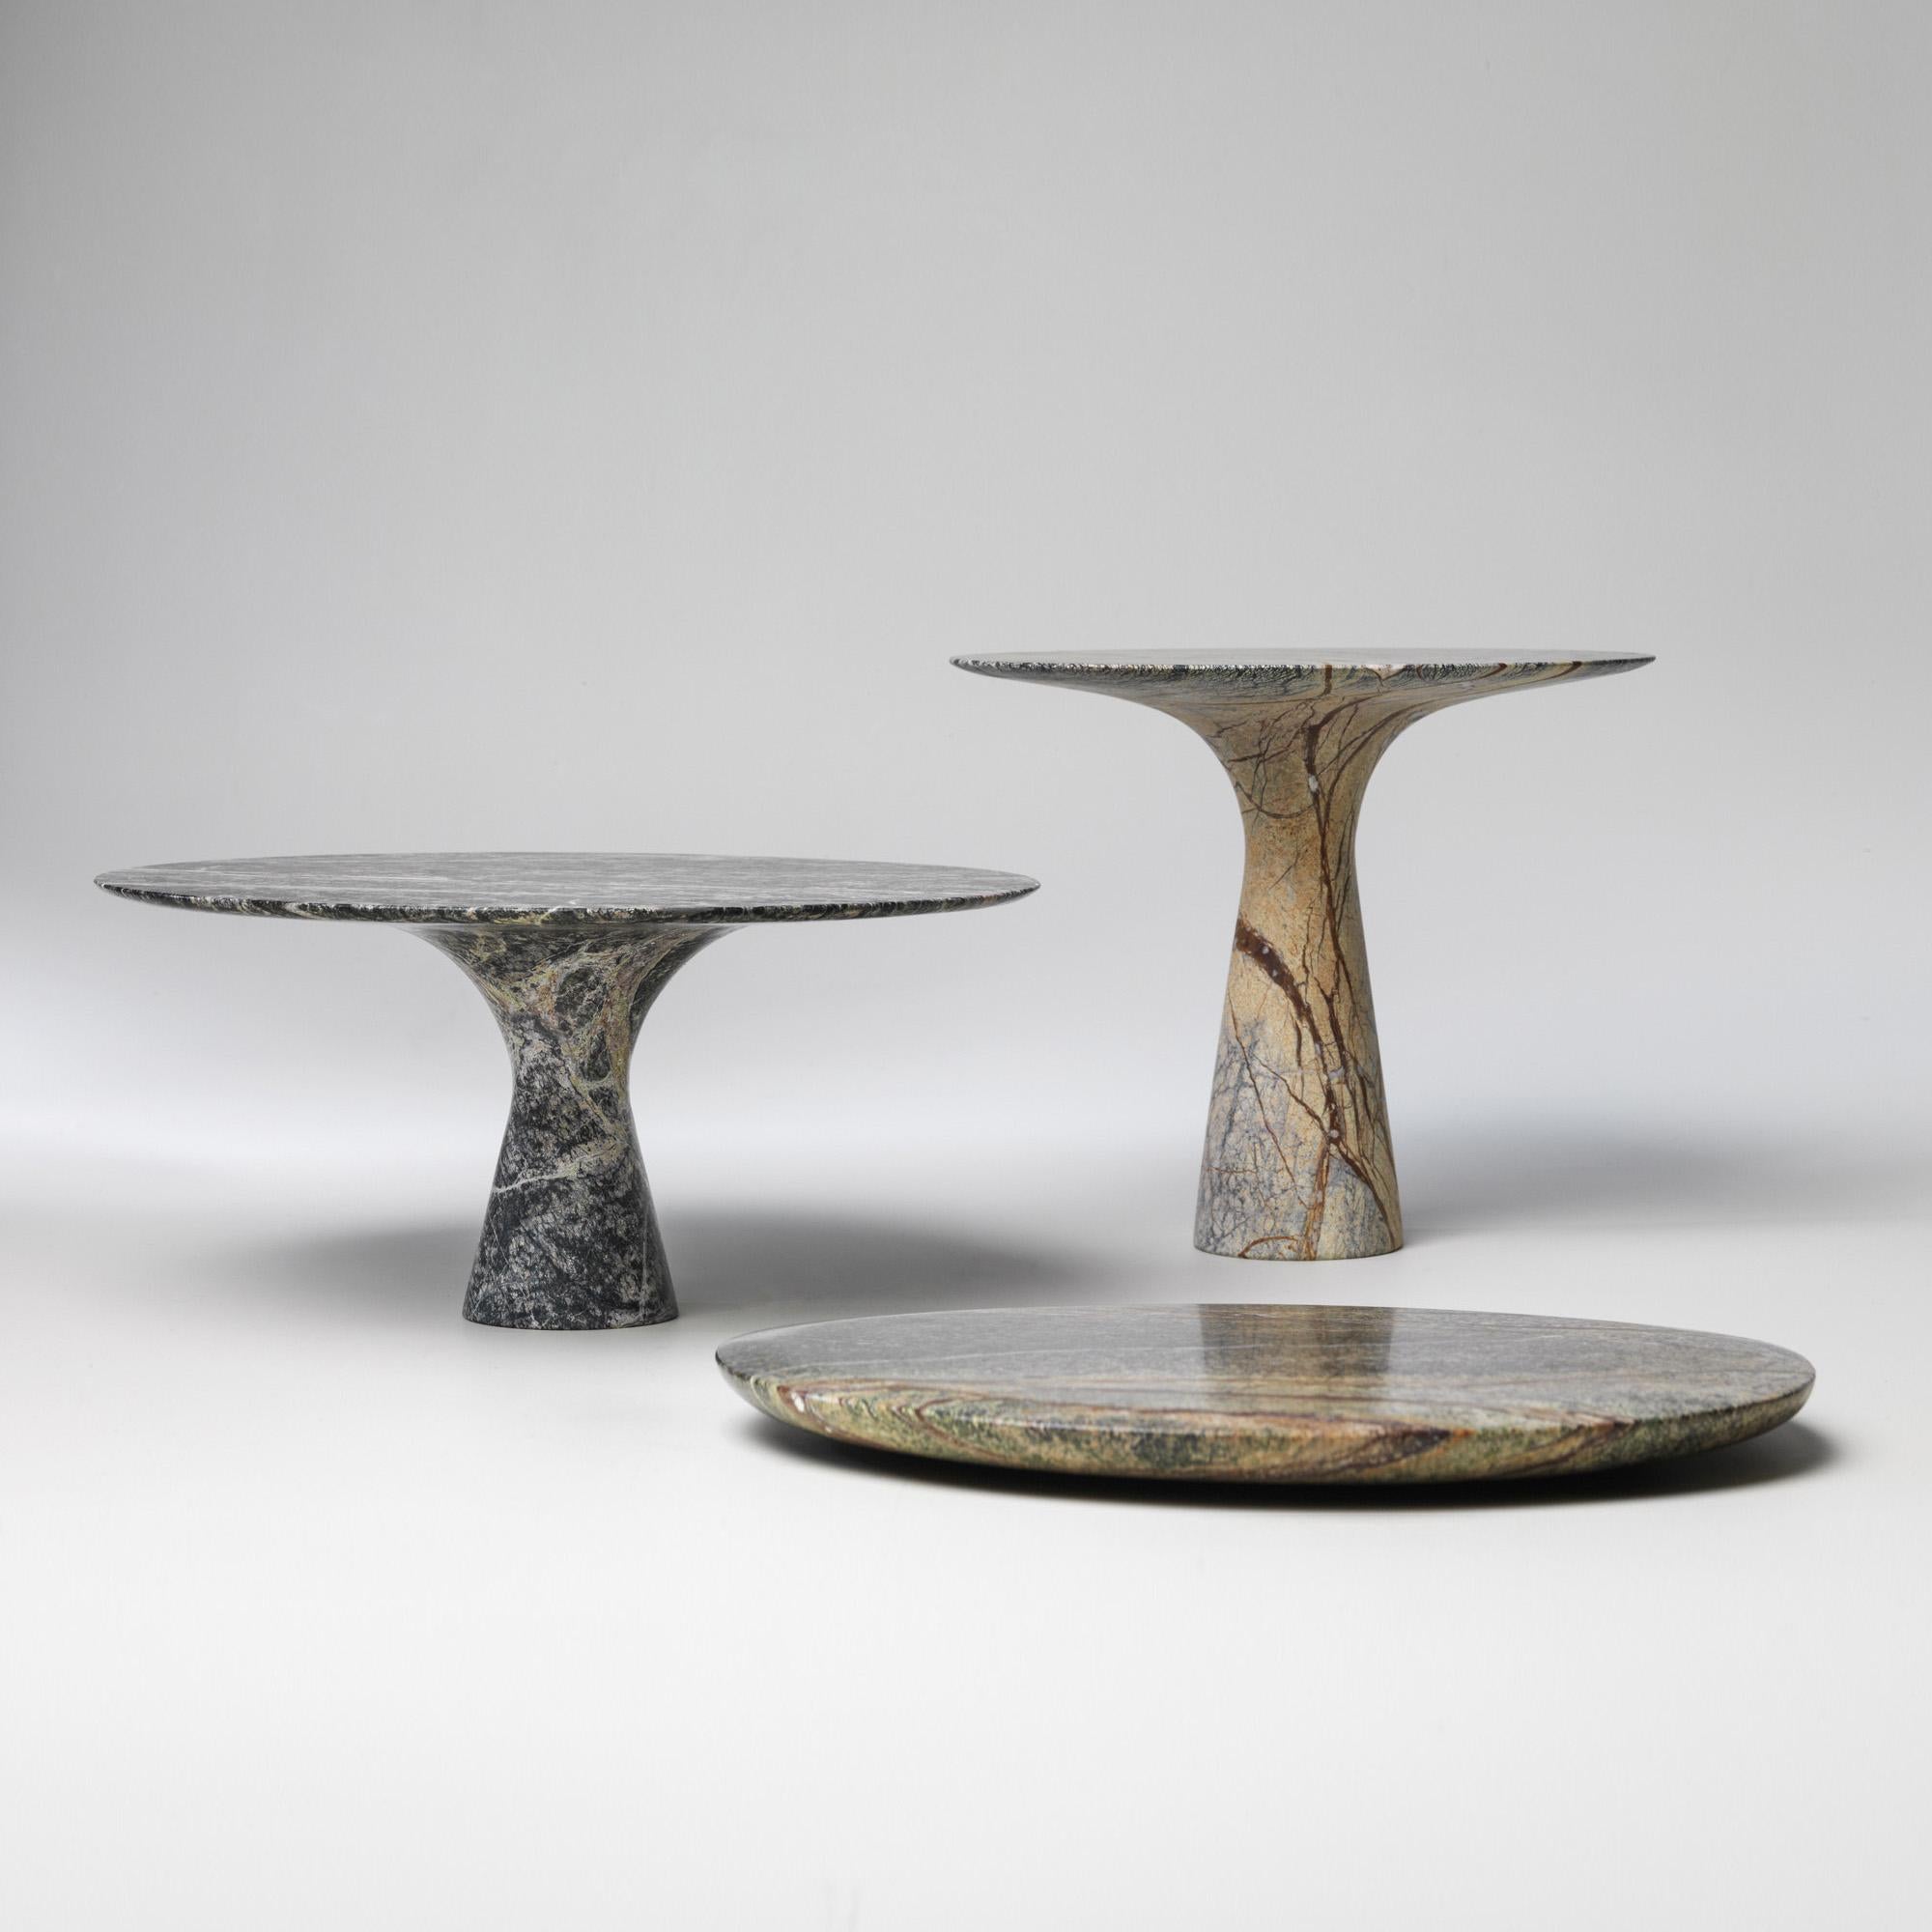 Set of 3 Refined Contemporary Marble Picasso Green Cake Stands and Plate
Signed by Leo Aerts.
Dimensions: 
D 26 x H 22.5 cm 
D 32 x H 15 cm
D 32 x H 2 cm
Material:Picasso Green marble
Technique: Polished, carved. 

Available in marble: